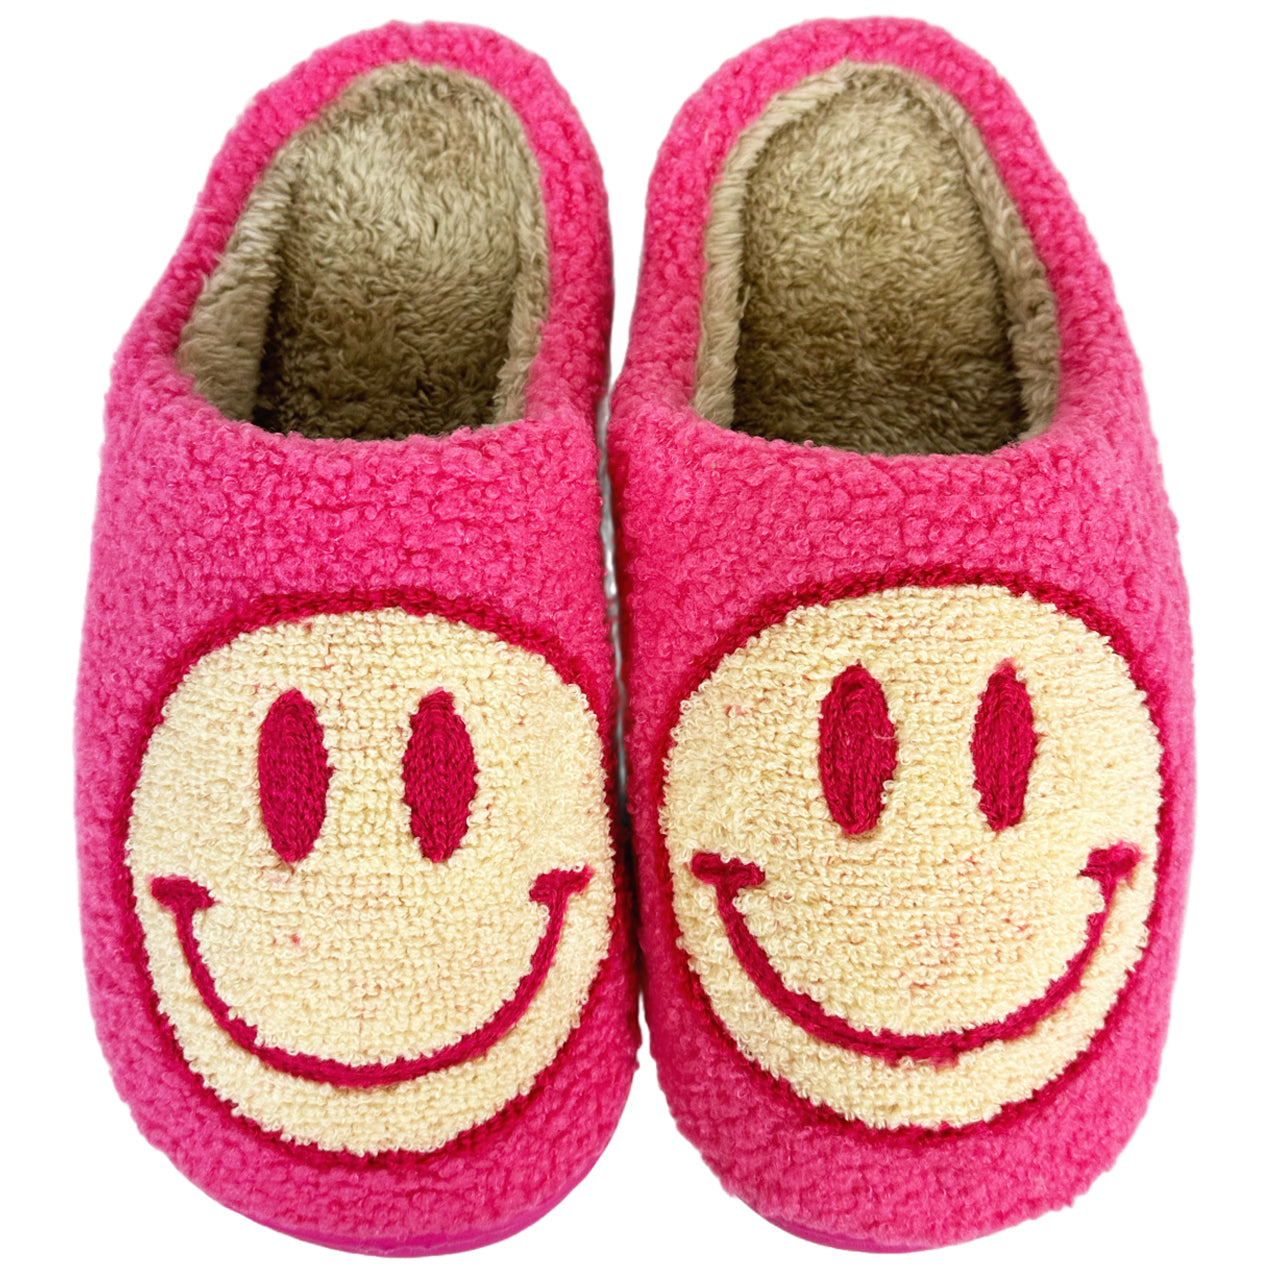 SF-1120 Beige Smile Hot Pink Slippers